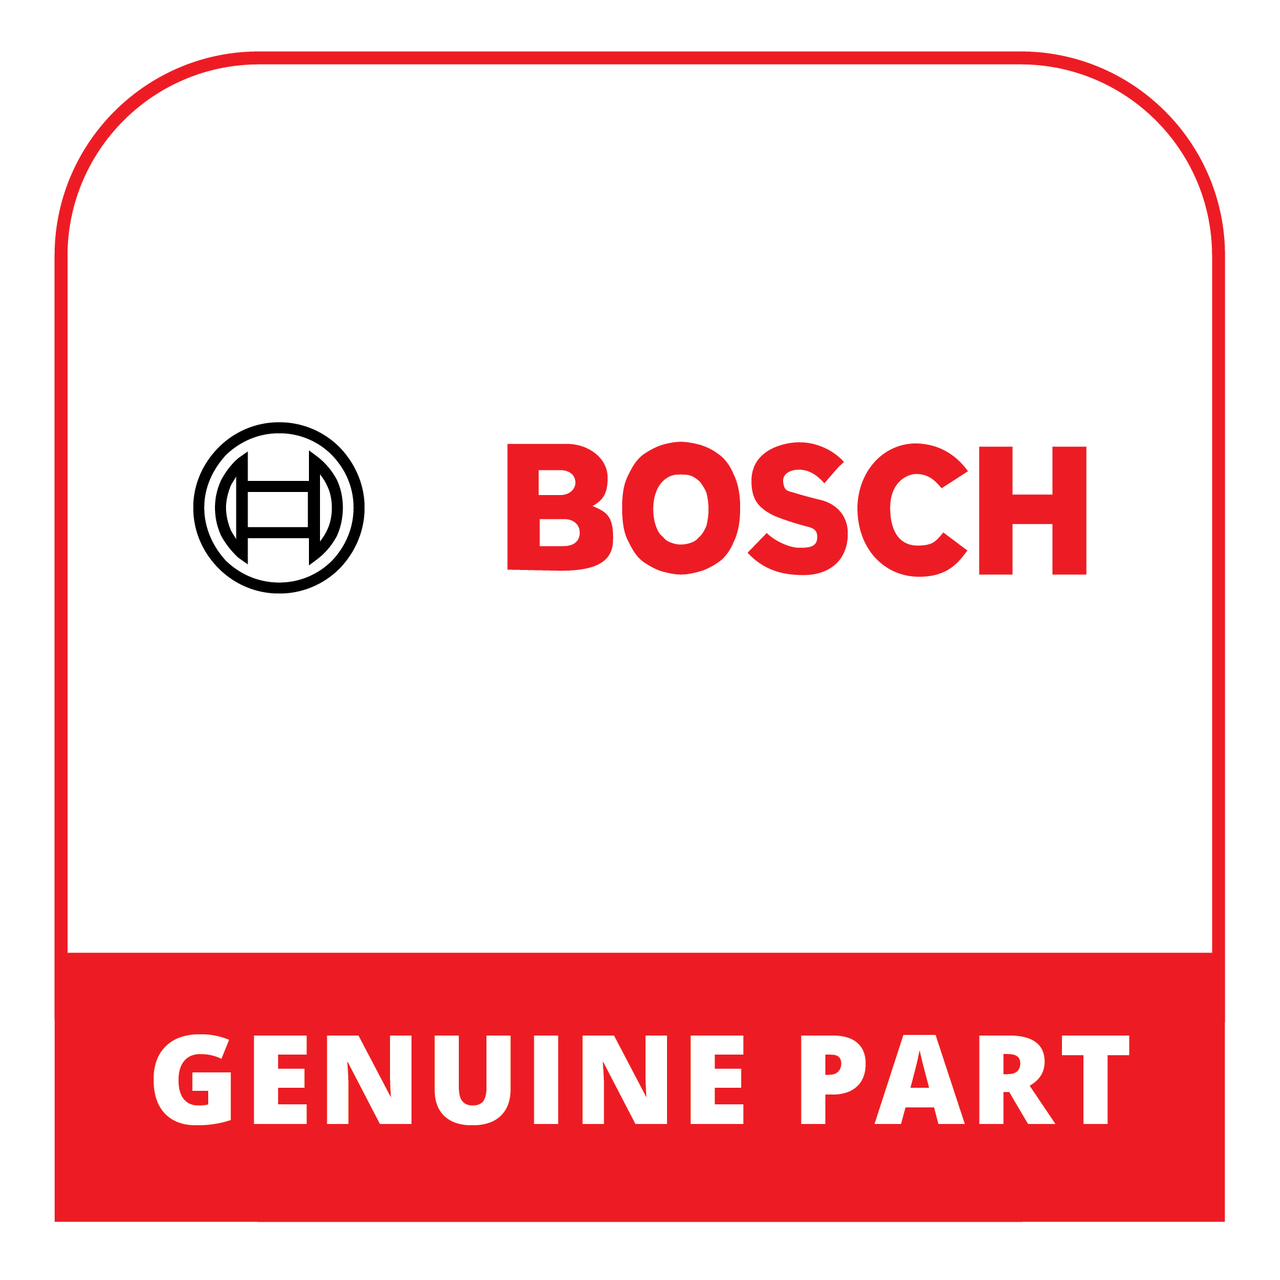 Bosch (Thermador) 17003002 - Active Carbon Filter - Genuine Bosch (Thermador) Part